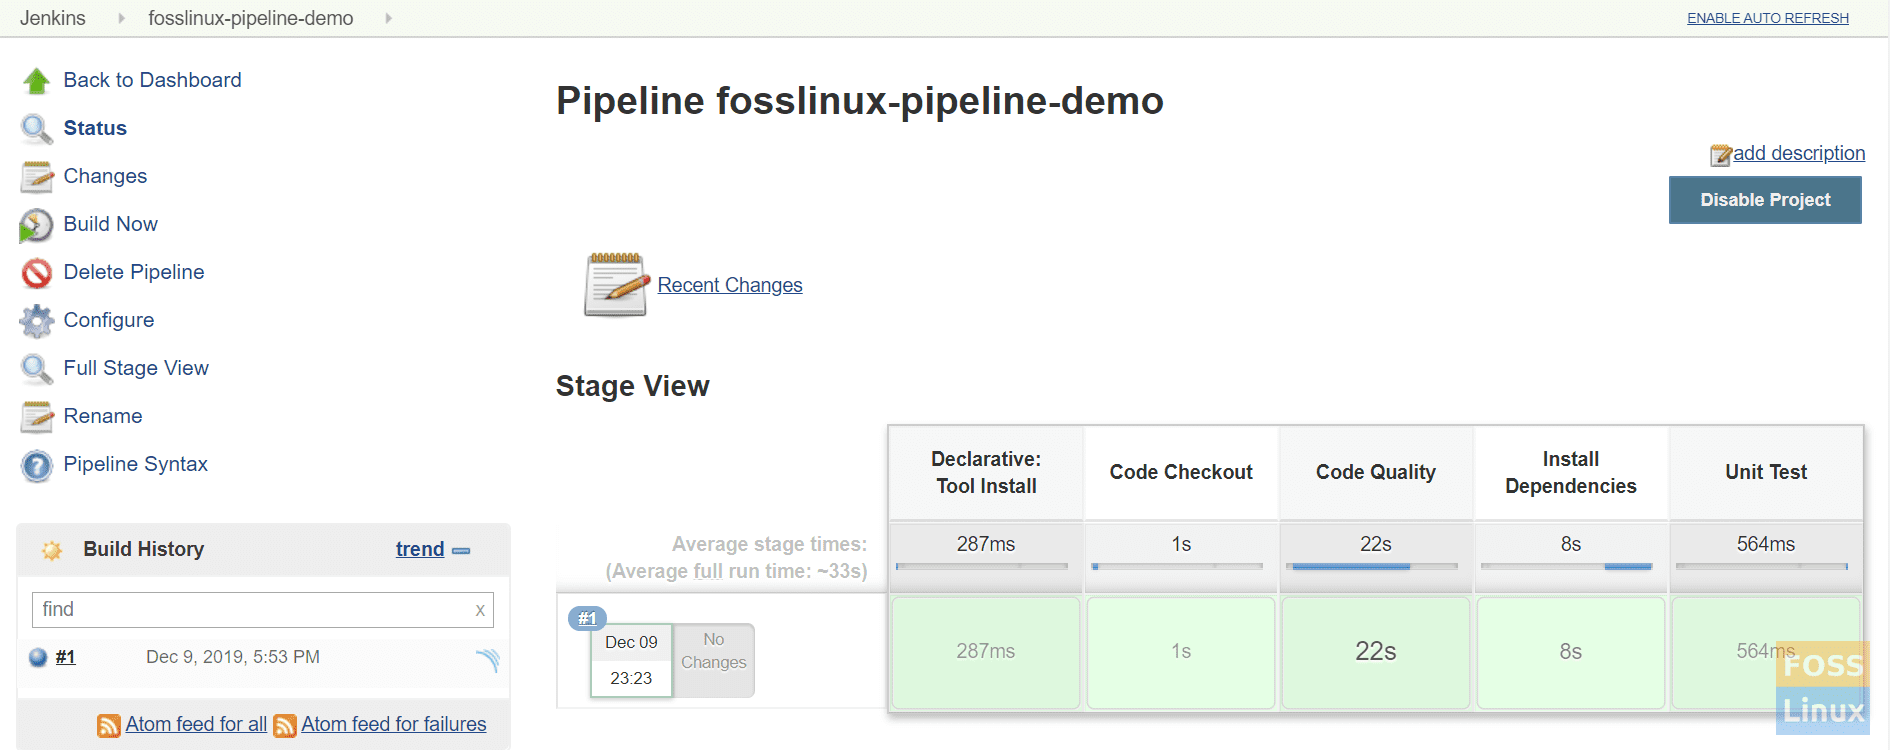 Completed Pipeline